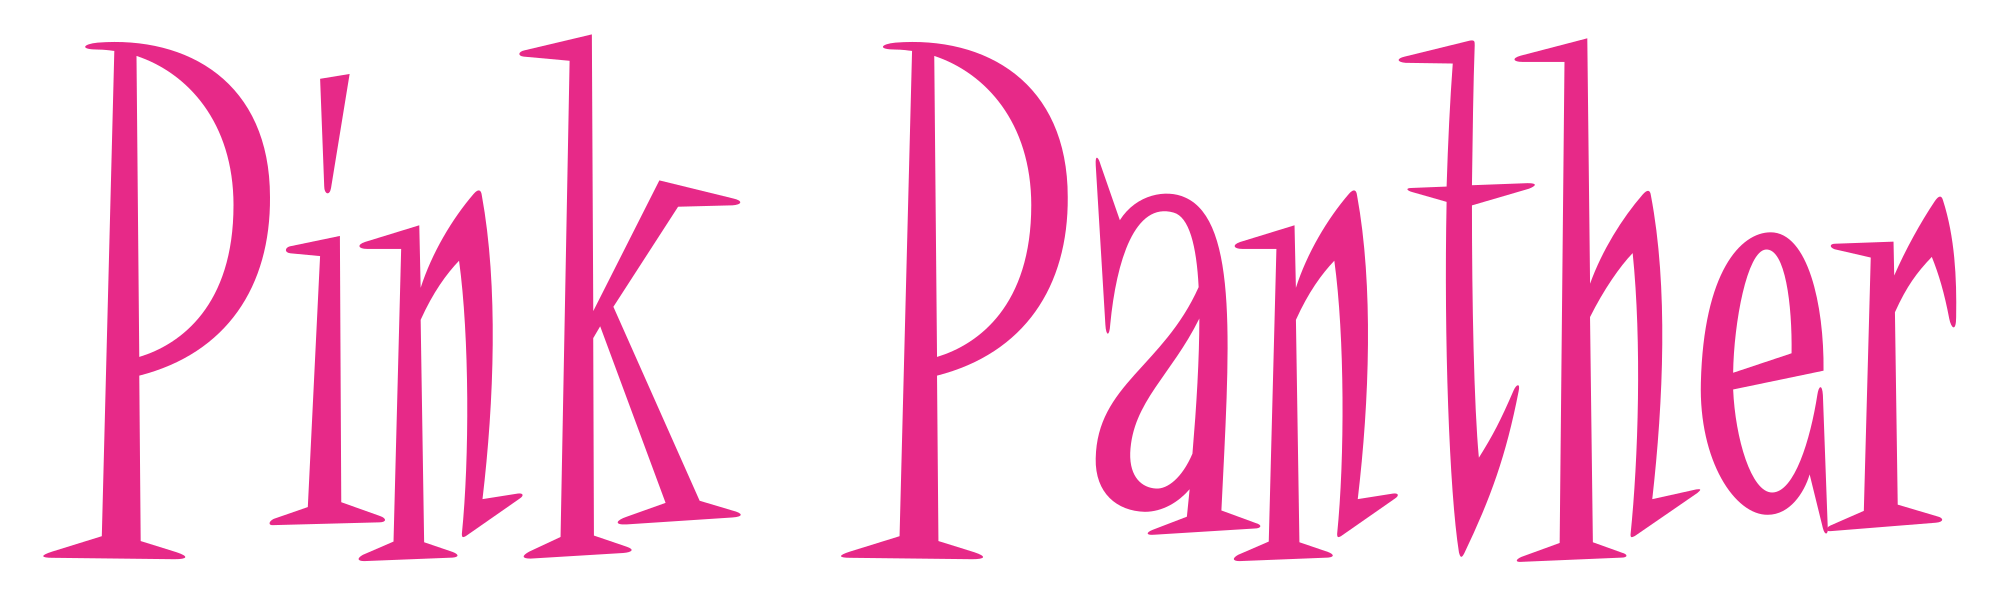 panther clipart svg